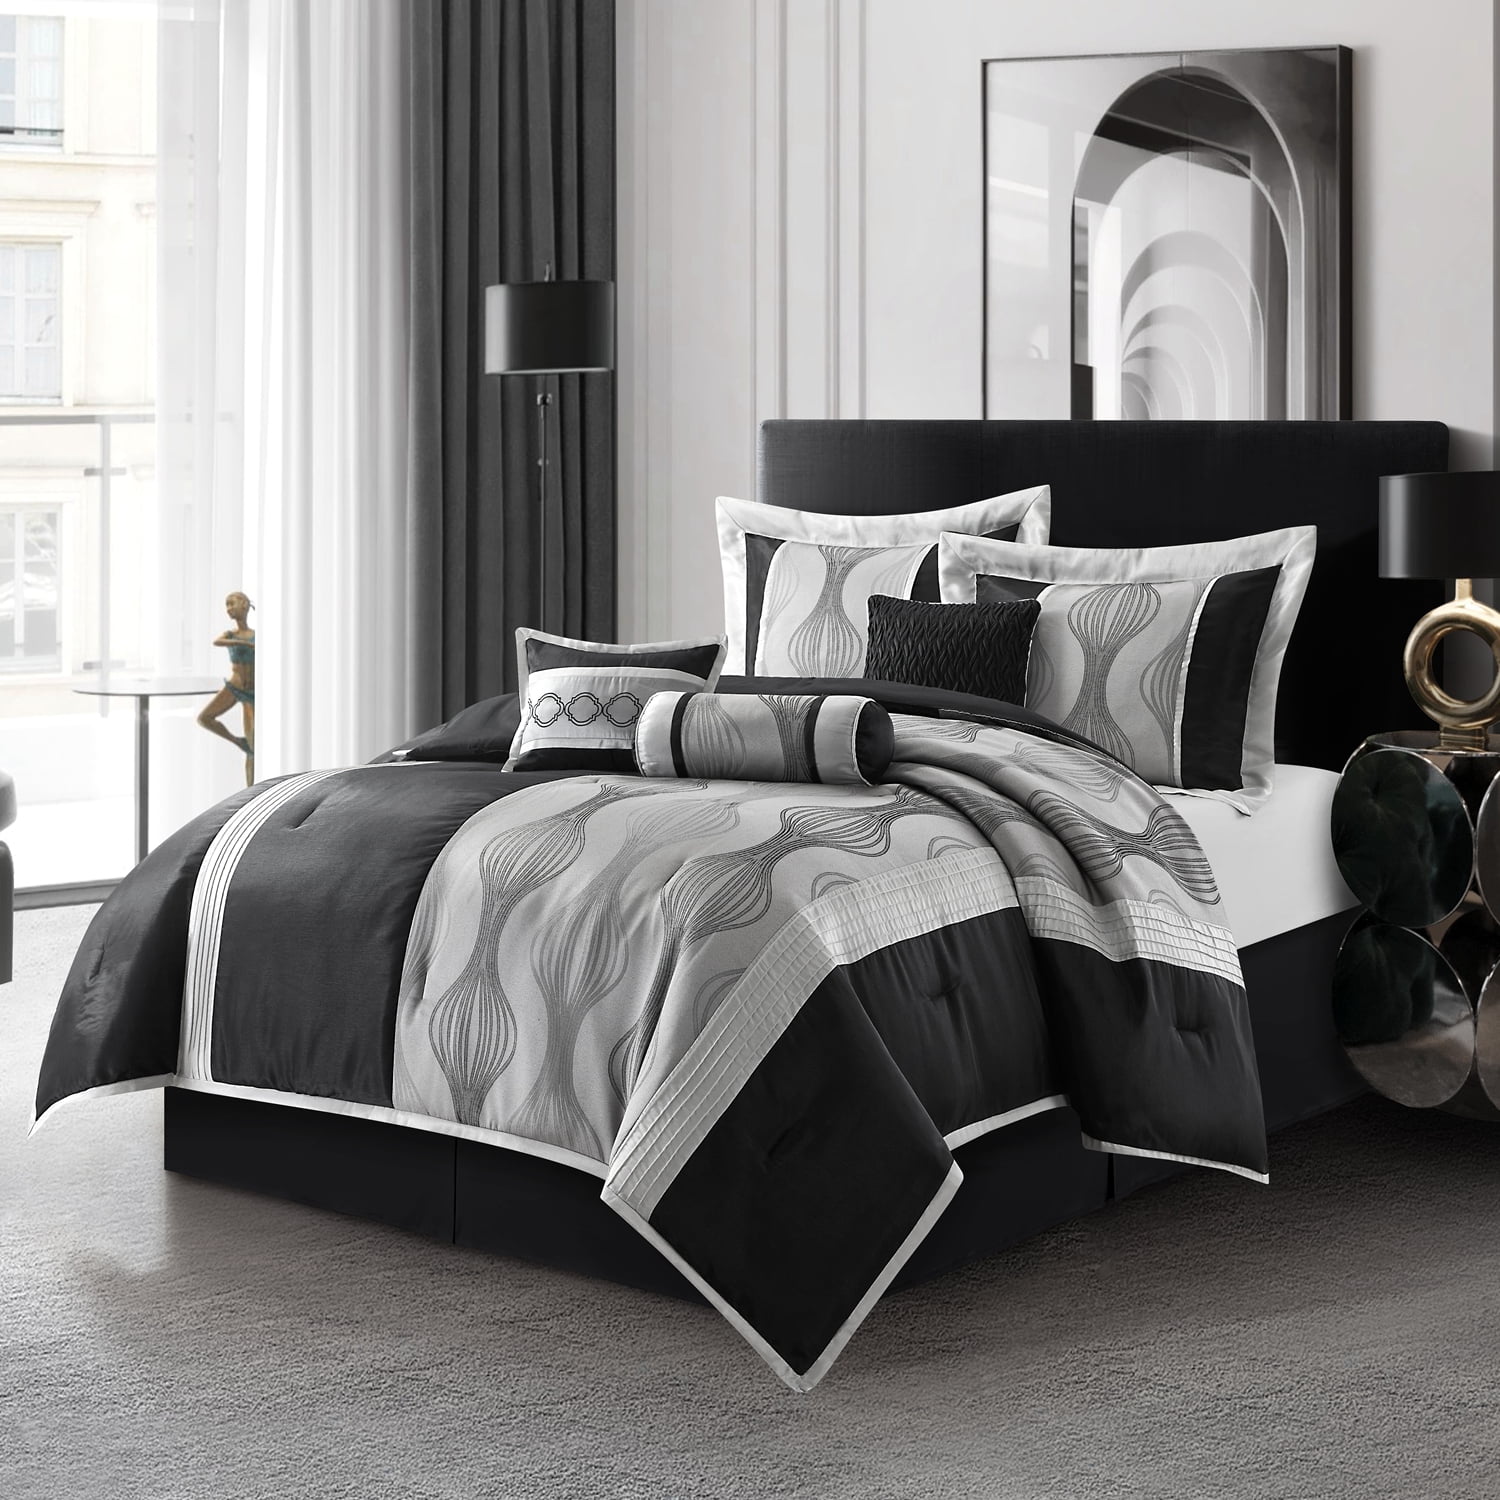 Lanco Black And Silver Comforter Set Queen Size 7 Pieces Bedding